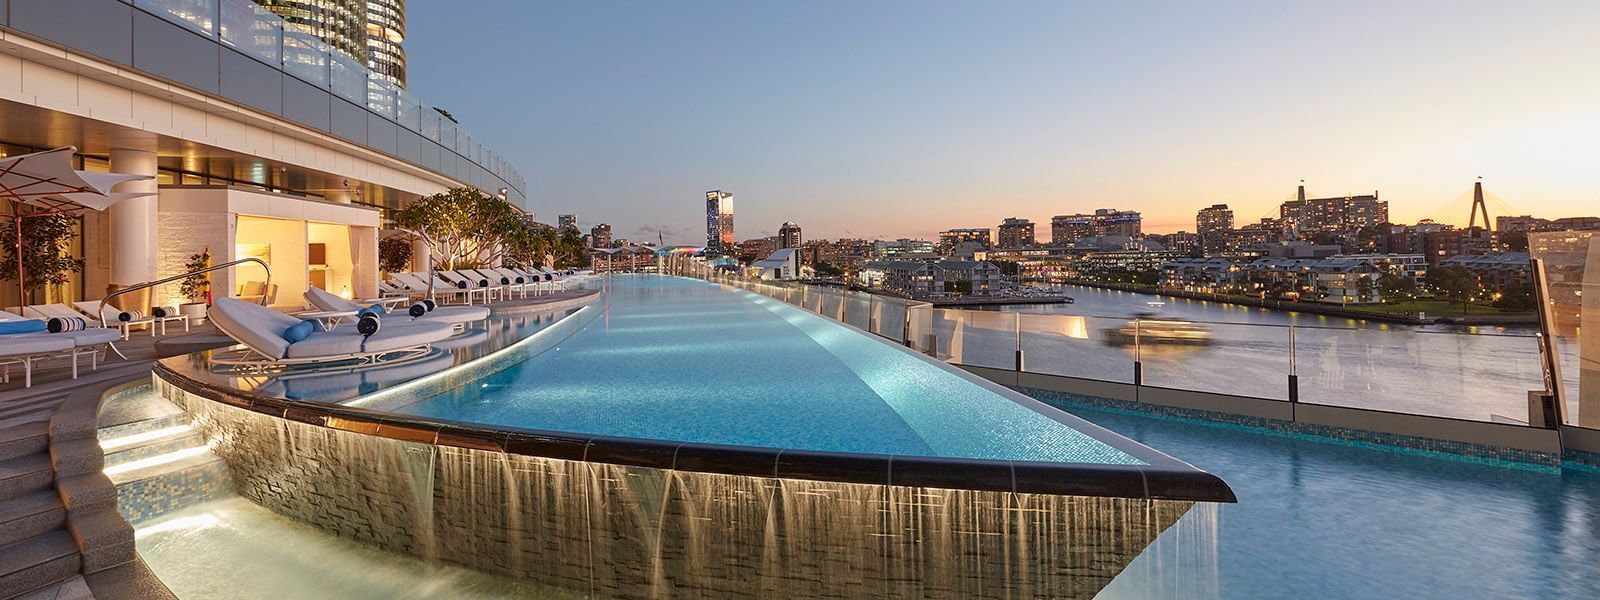 Landscape view of an infinity pool with city view at Crown Hotels